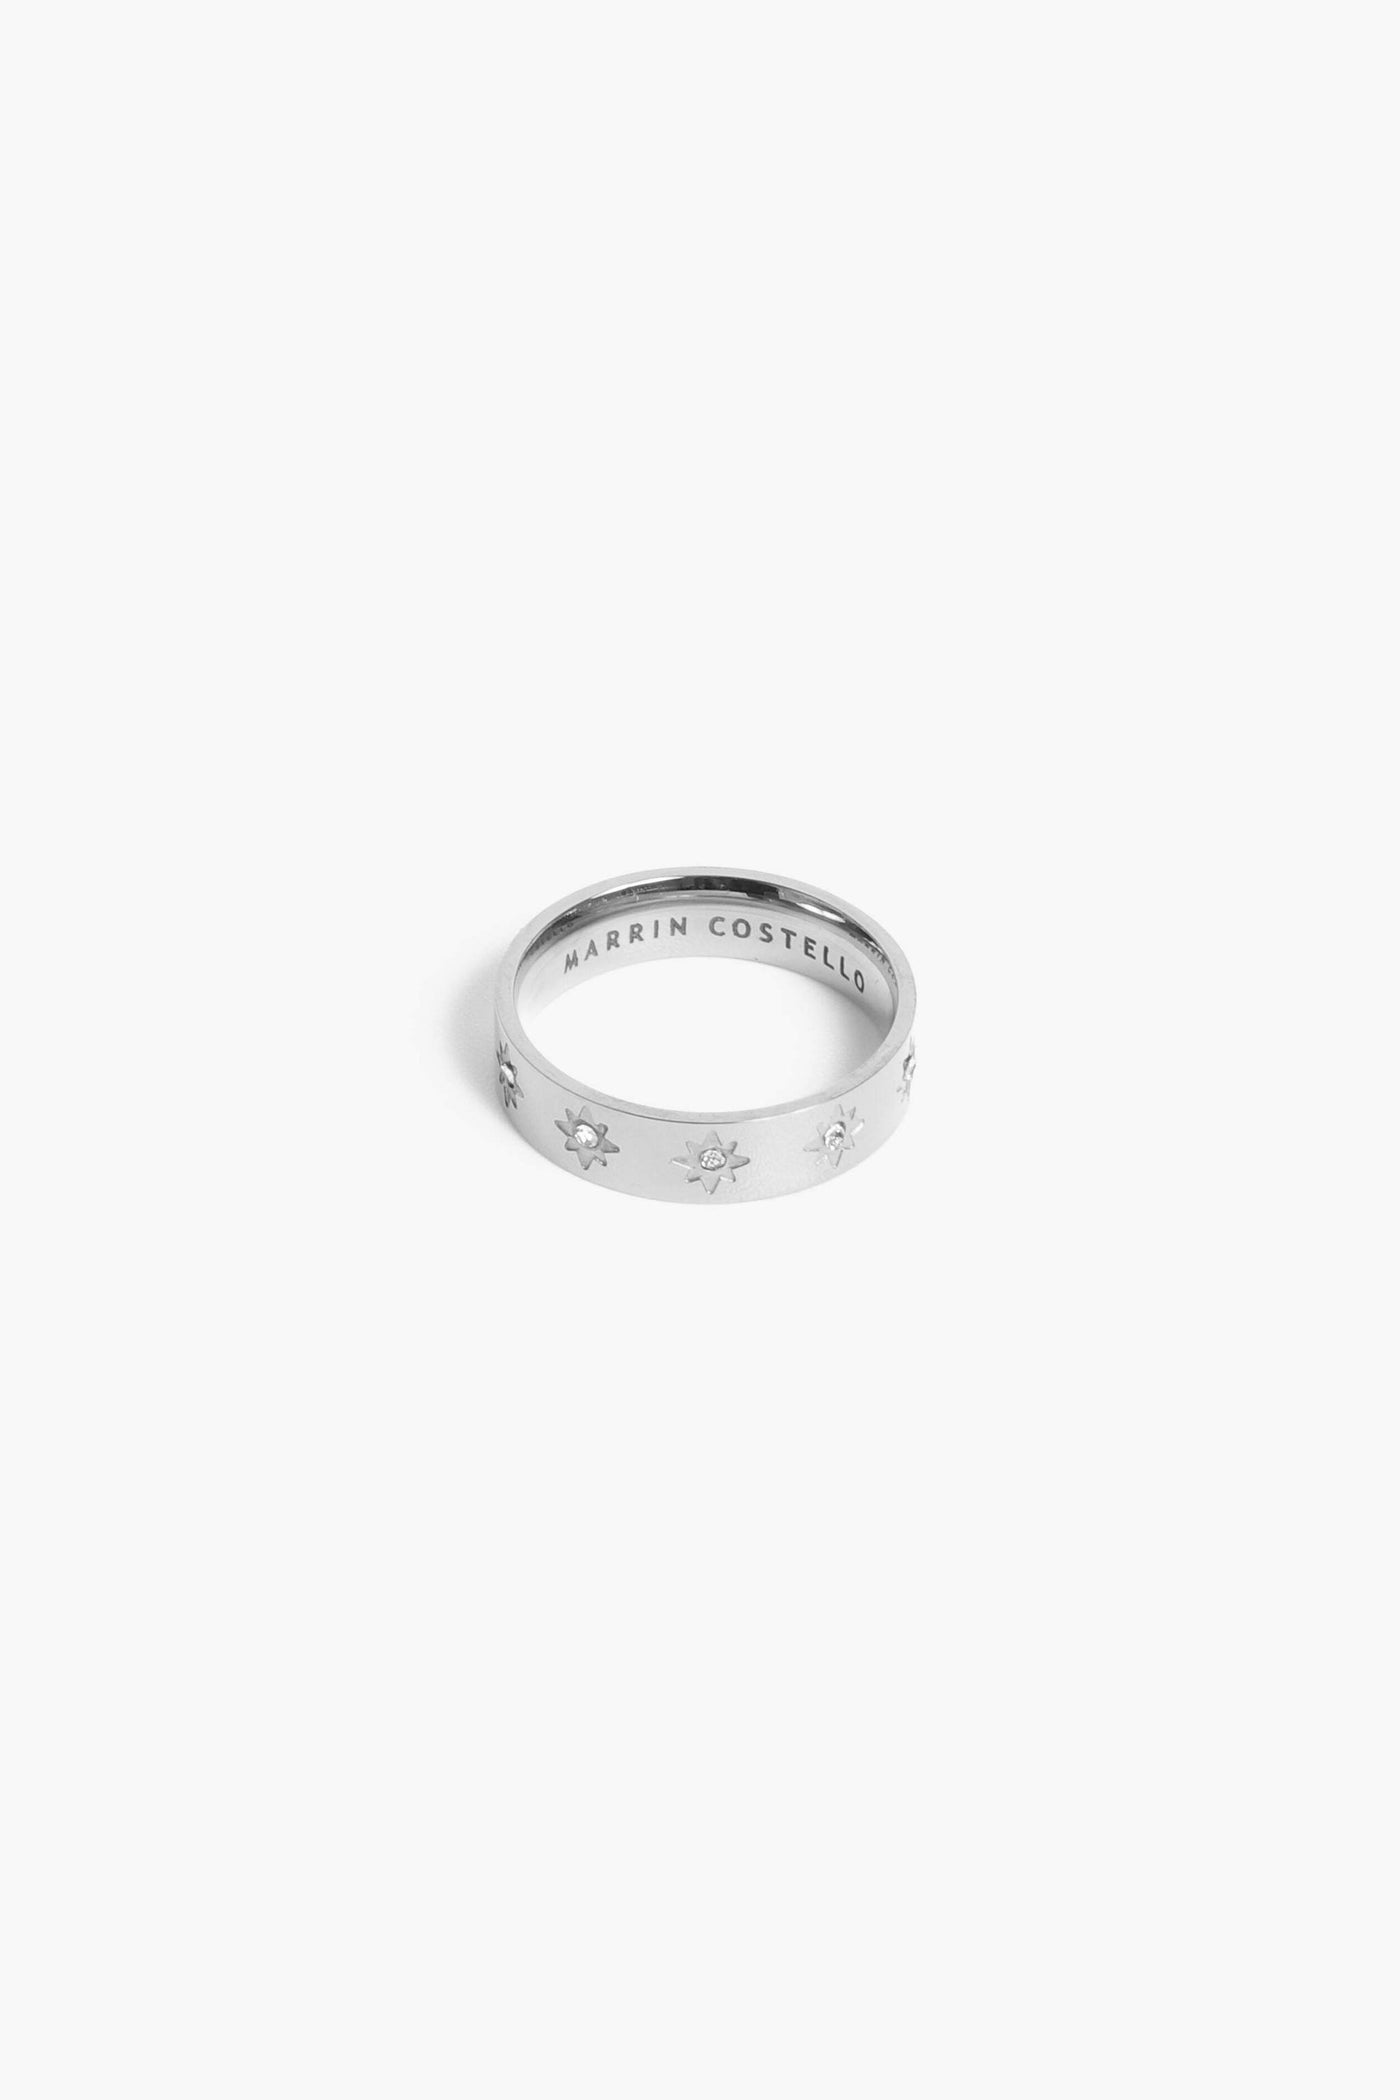 Marrin Costello Jewelry Orion Band star motif ring with CZ detail. Available in sizes 6, 7, 8. Waterproof, sustainable, hypoallergenic. Polished stainless steel.